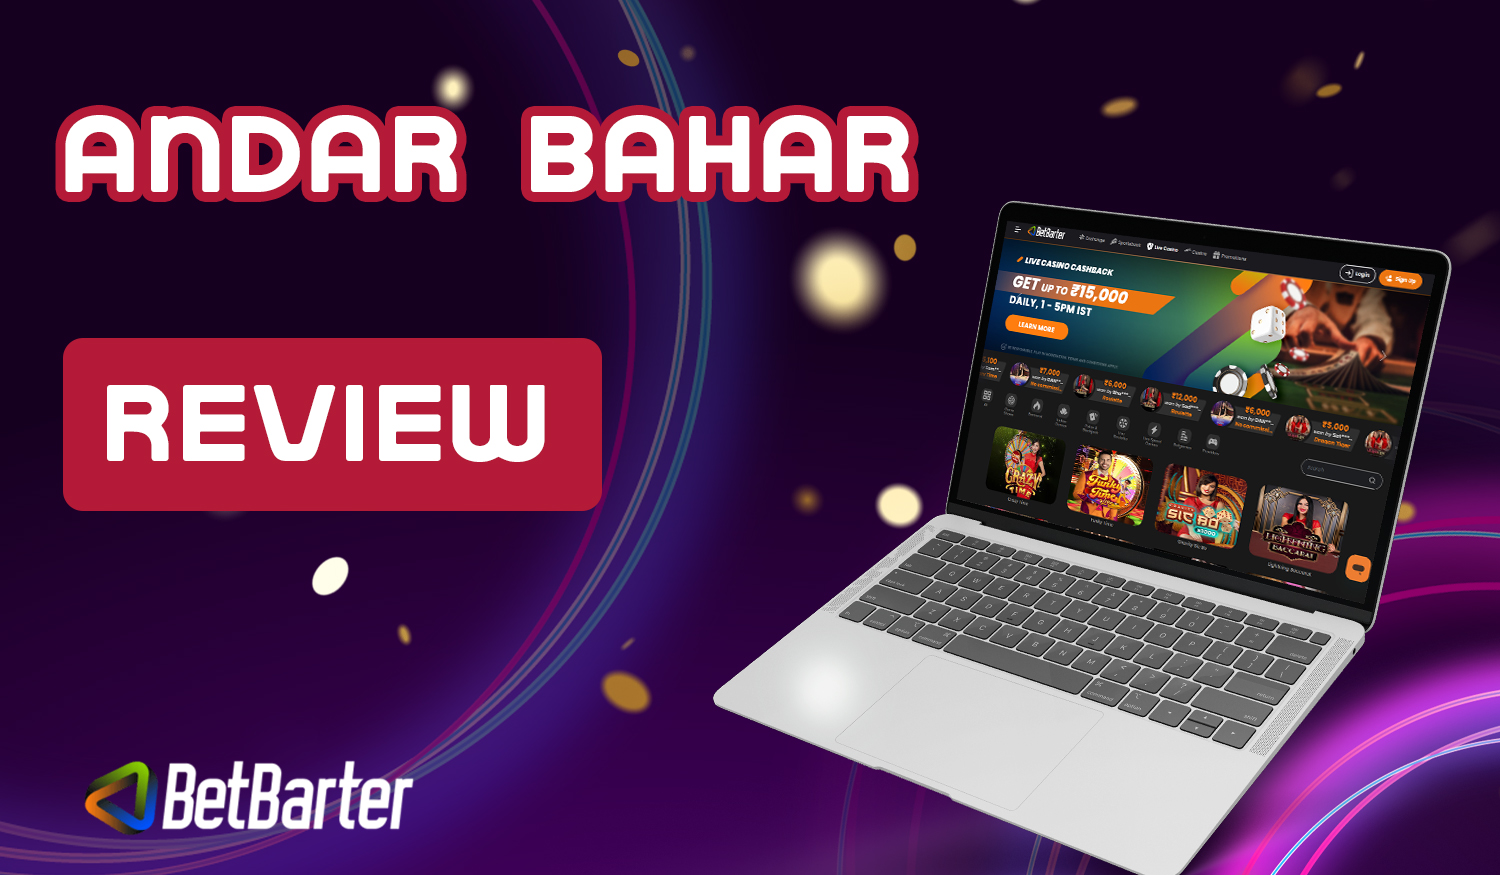 Full review of the Indian gambling game Andar Bahar on the BetBarter website